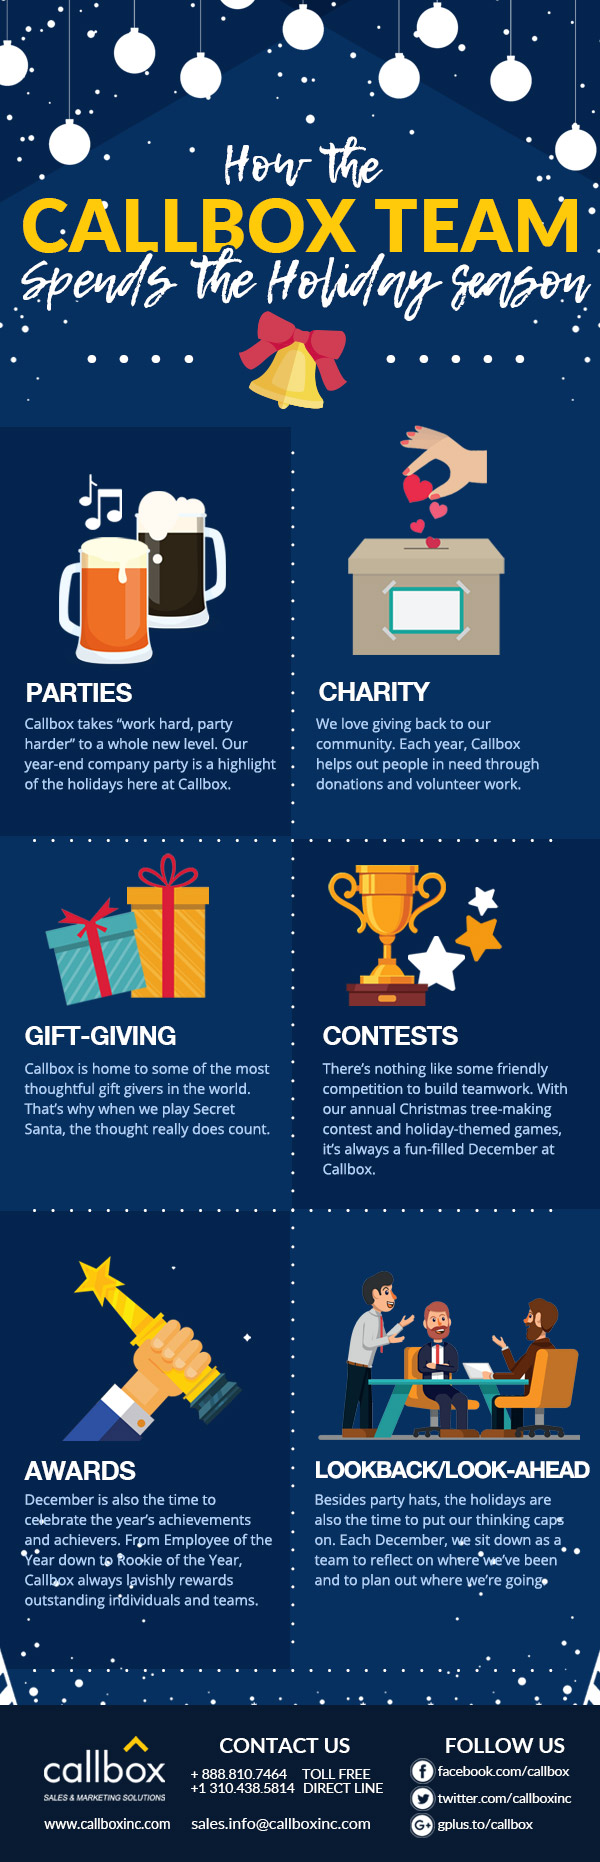 How the Callbox Team Spends the Holiday Season [INFOGRAPHIC]